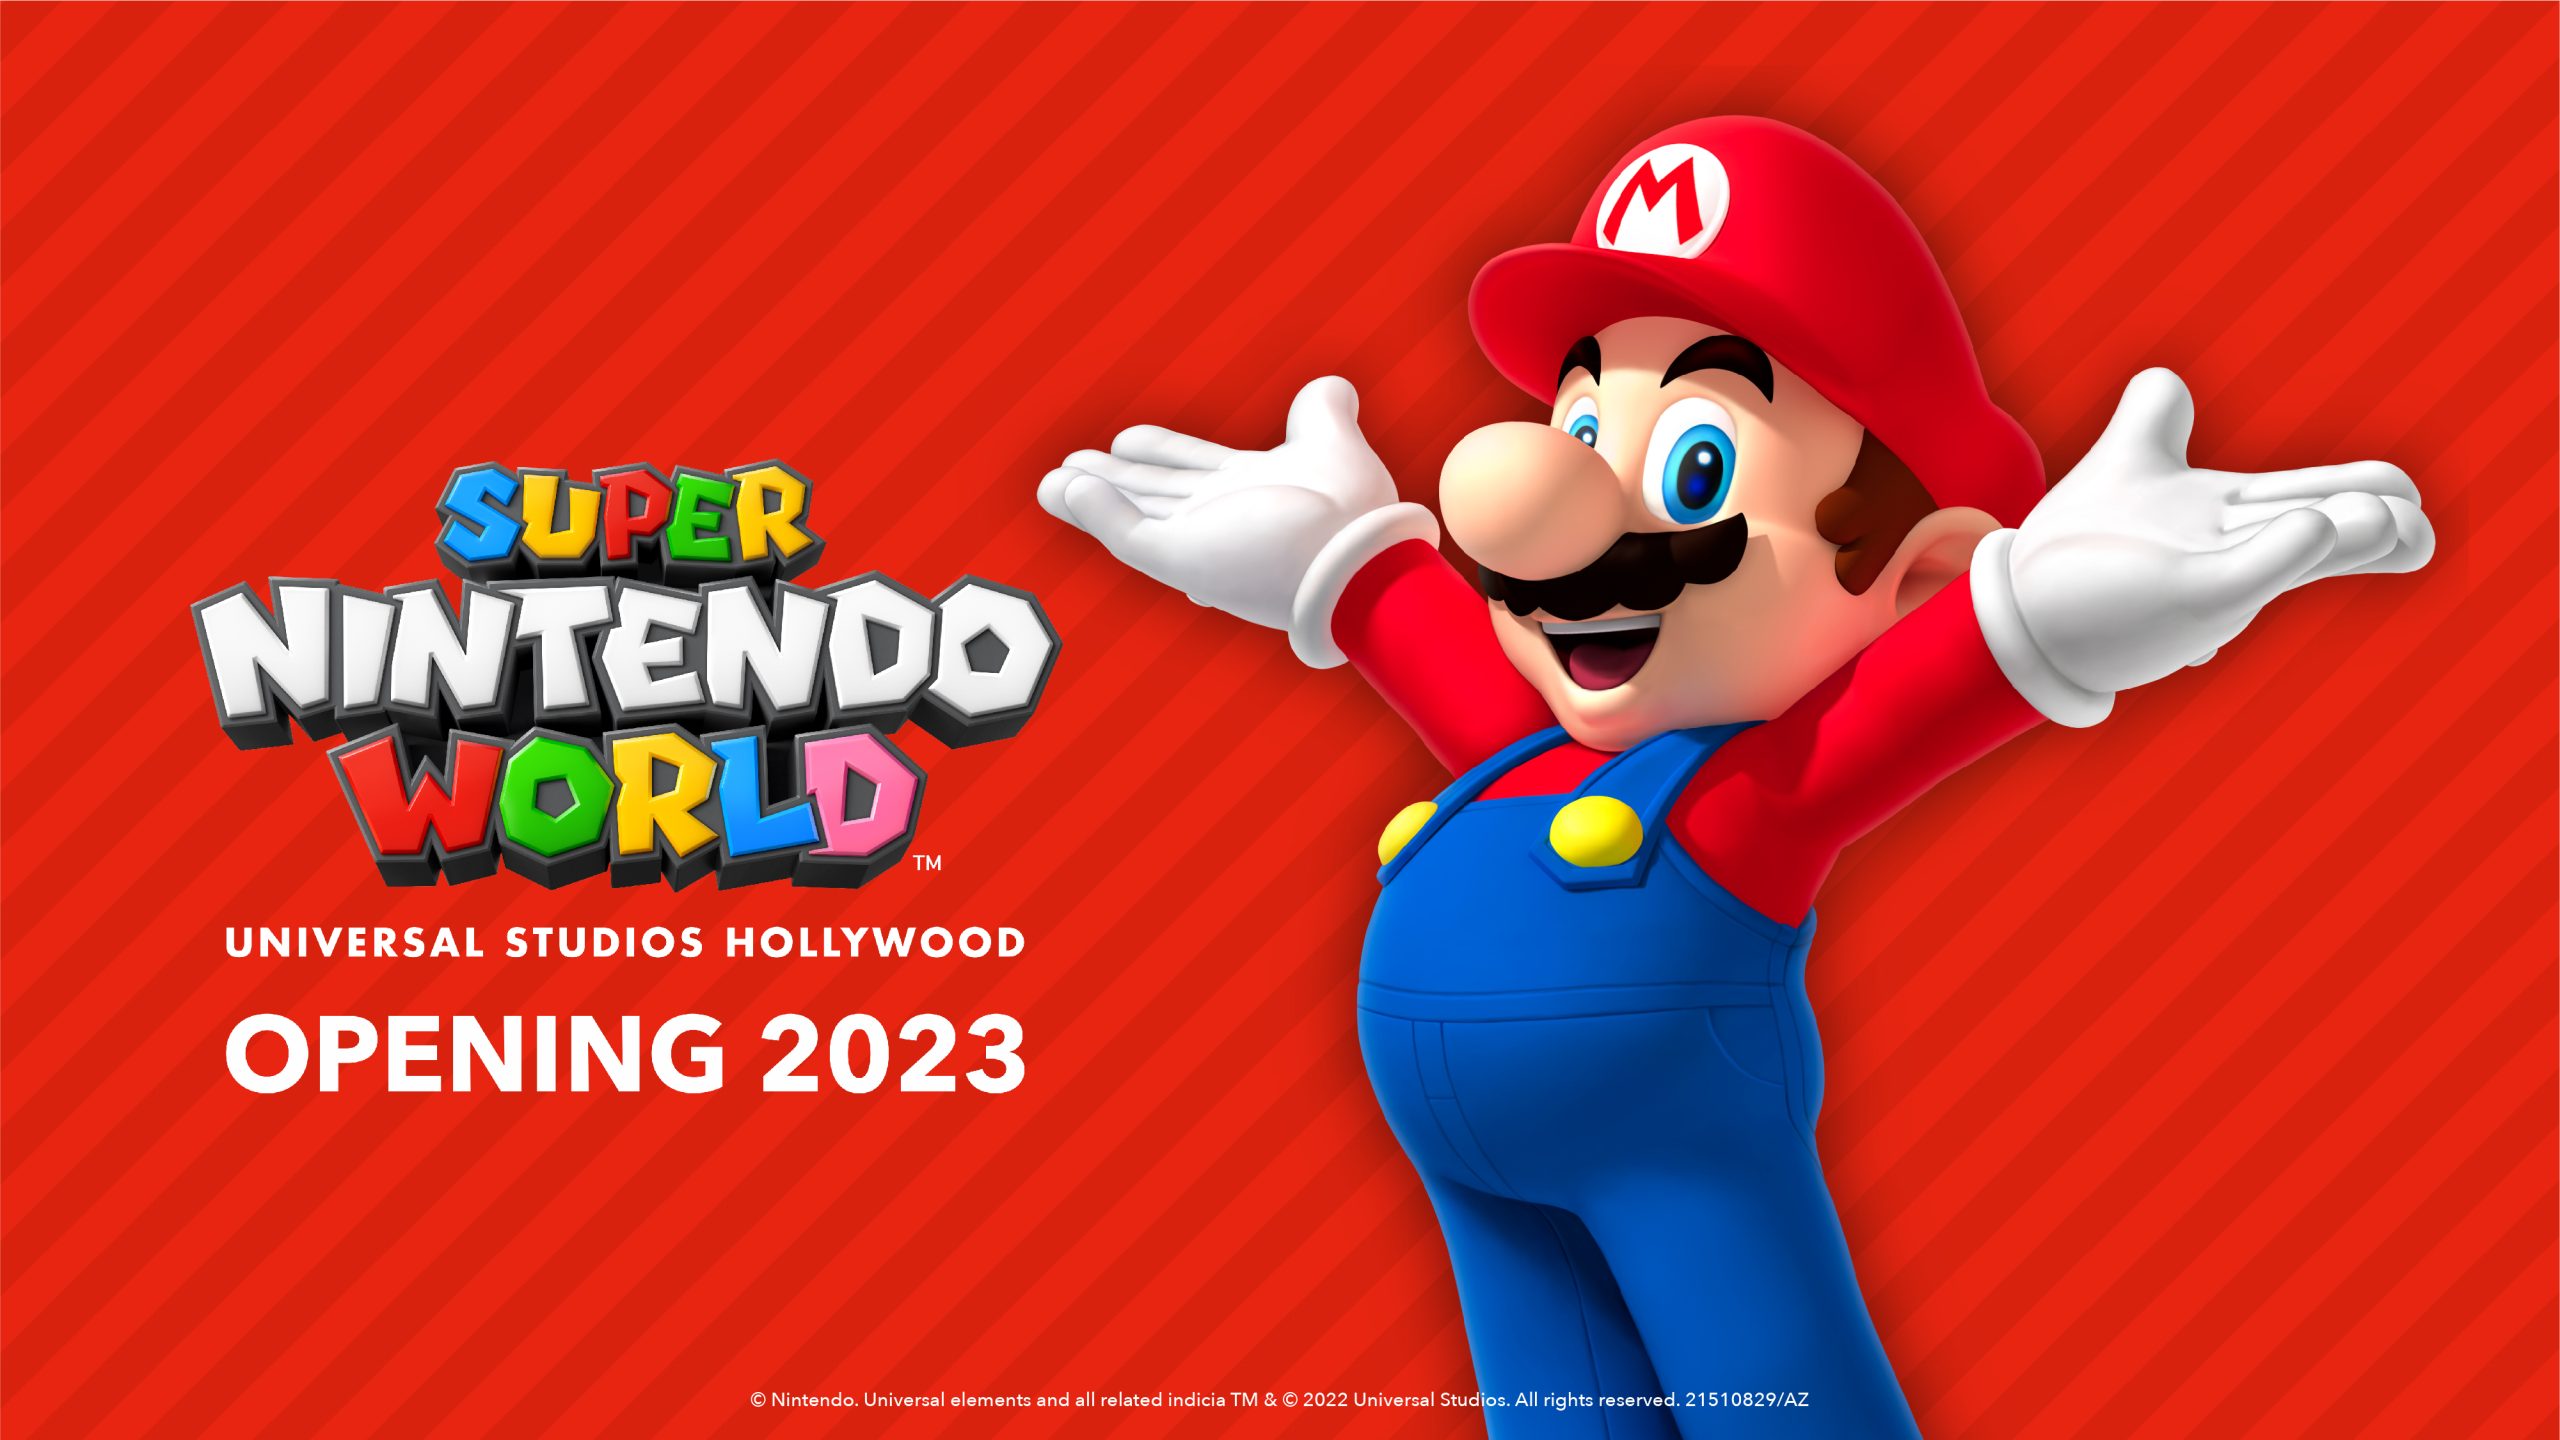 We quit! Super Nintendo World is coming to America next year!